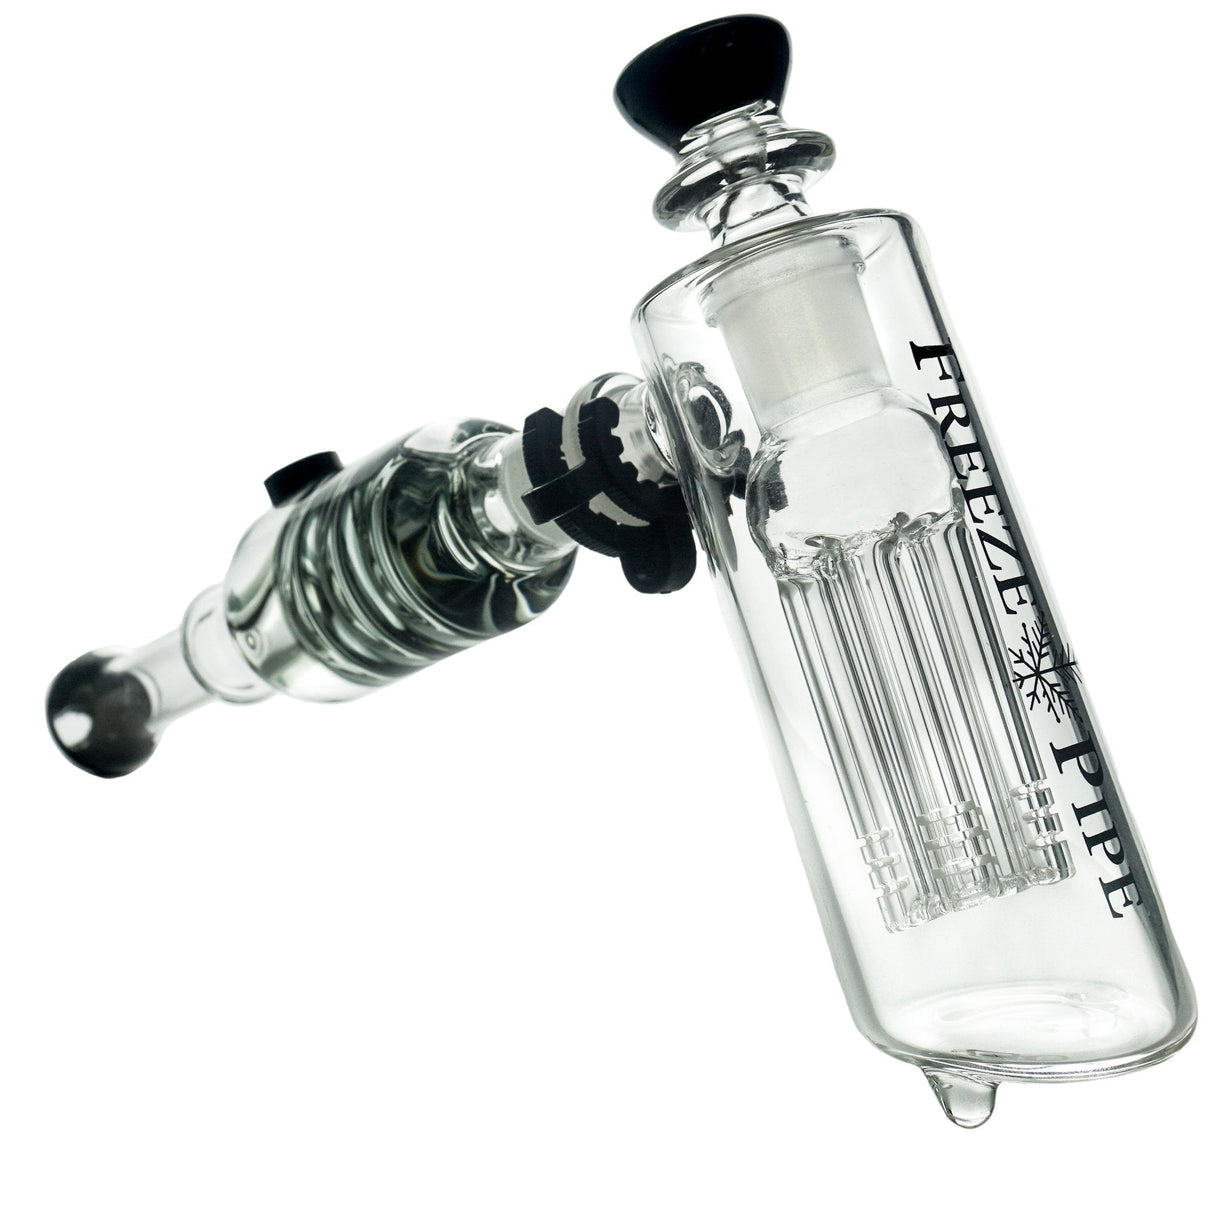 Freeze Pipe Bubbler with Tree Percolator and 18-19mm Joint Size - Angled Side View